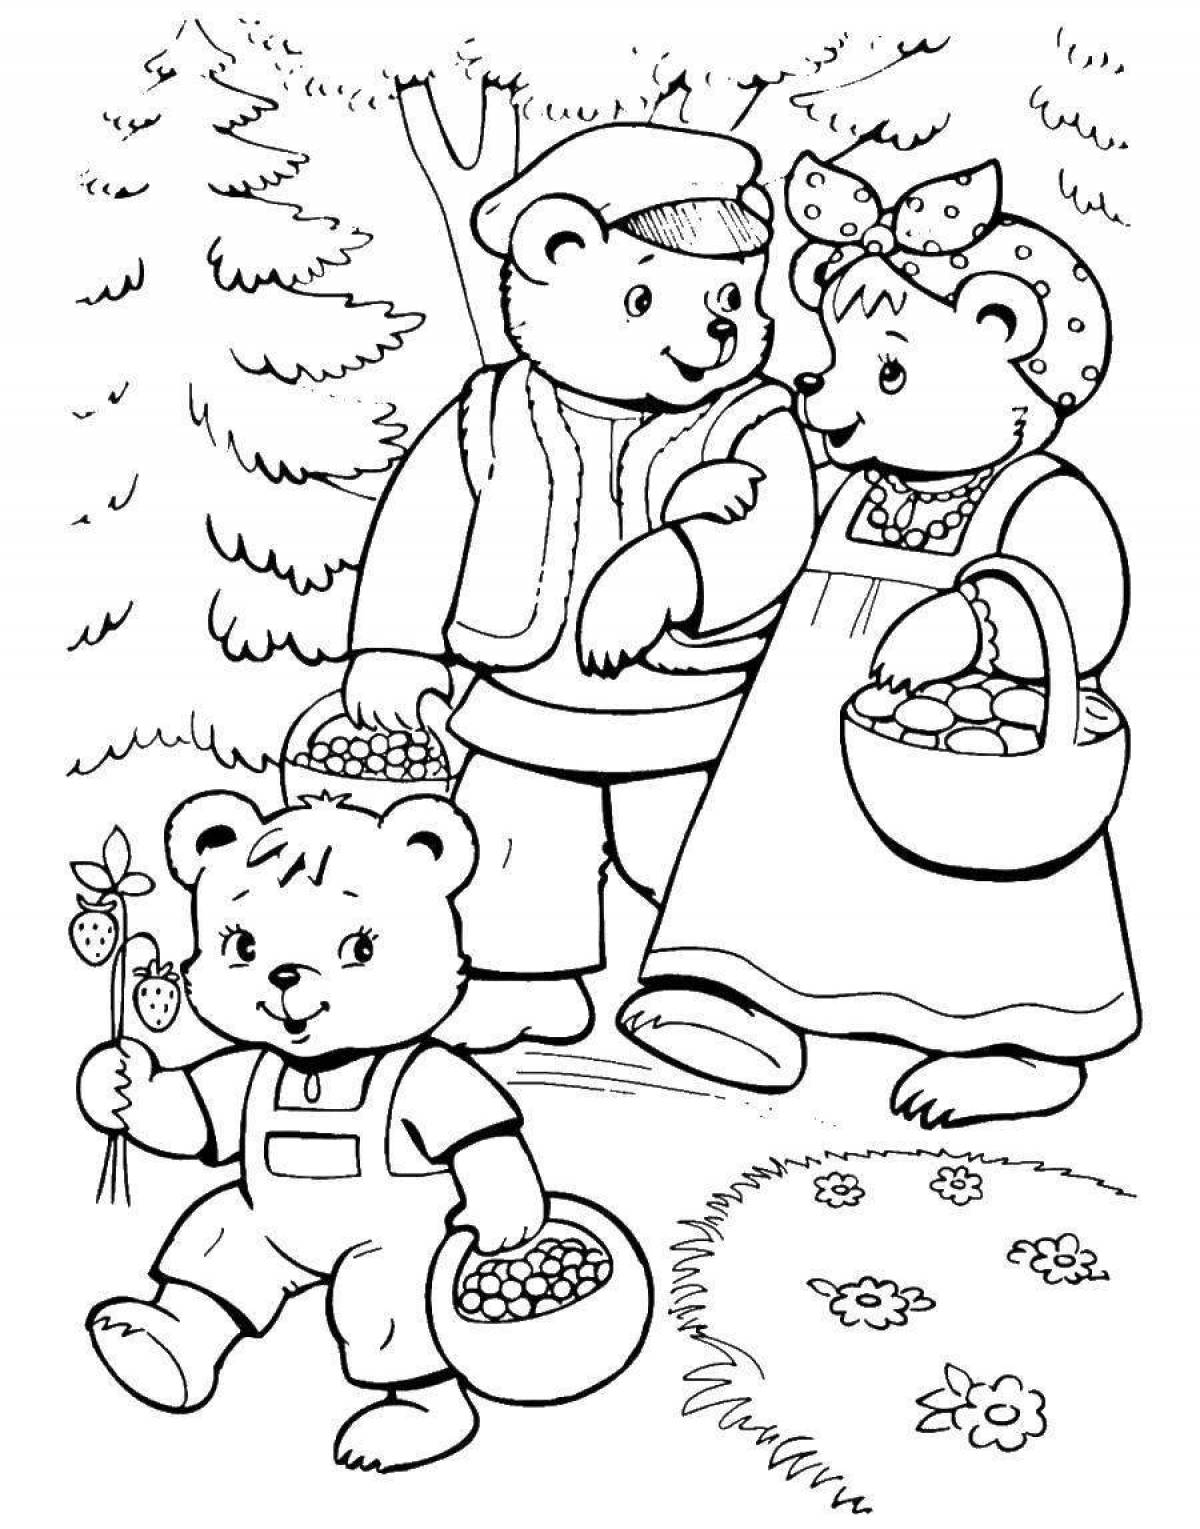 Mystical coloring book based on fairy tales